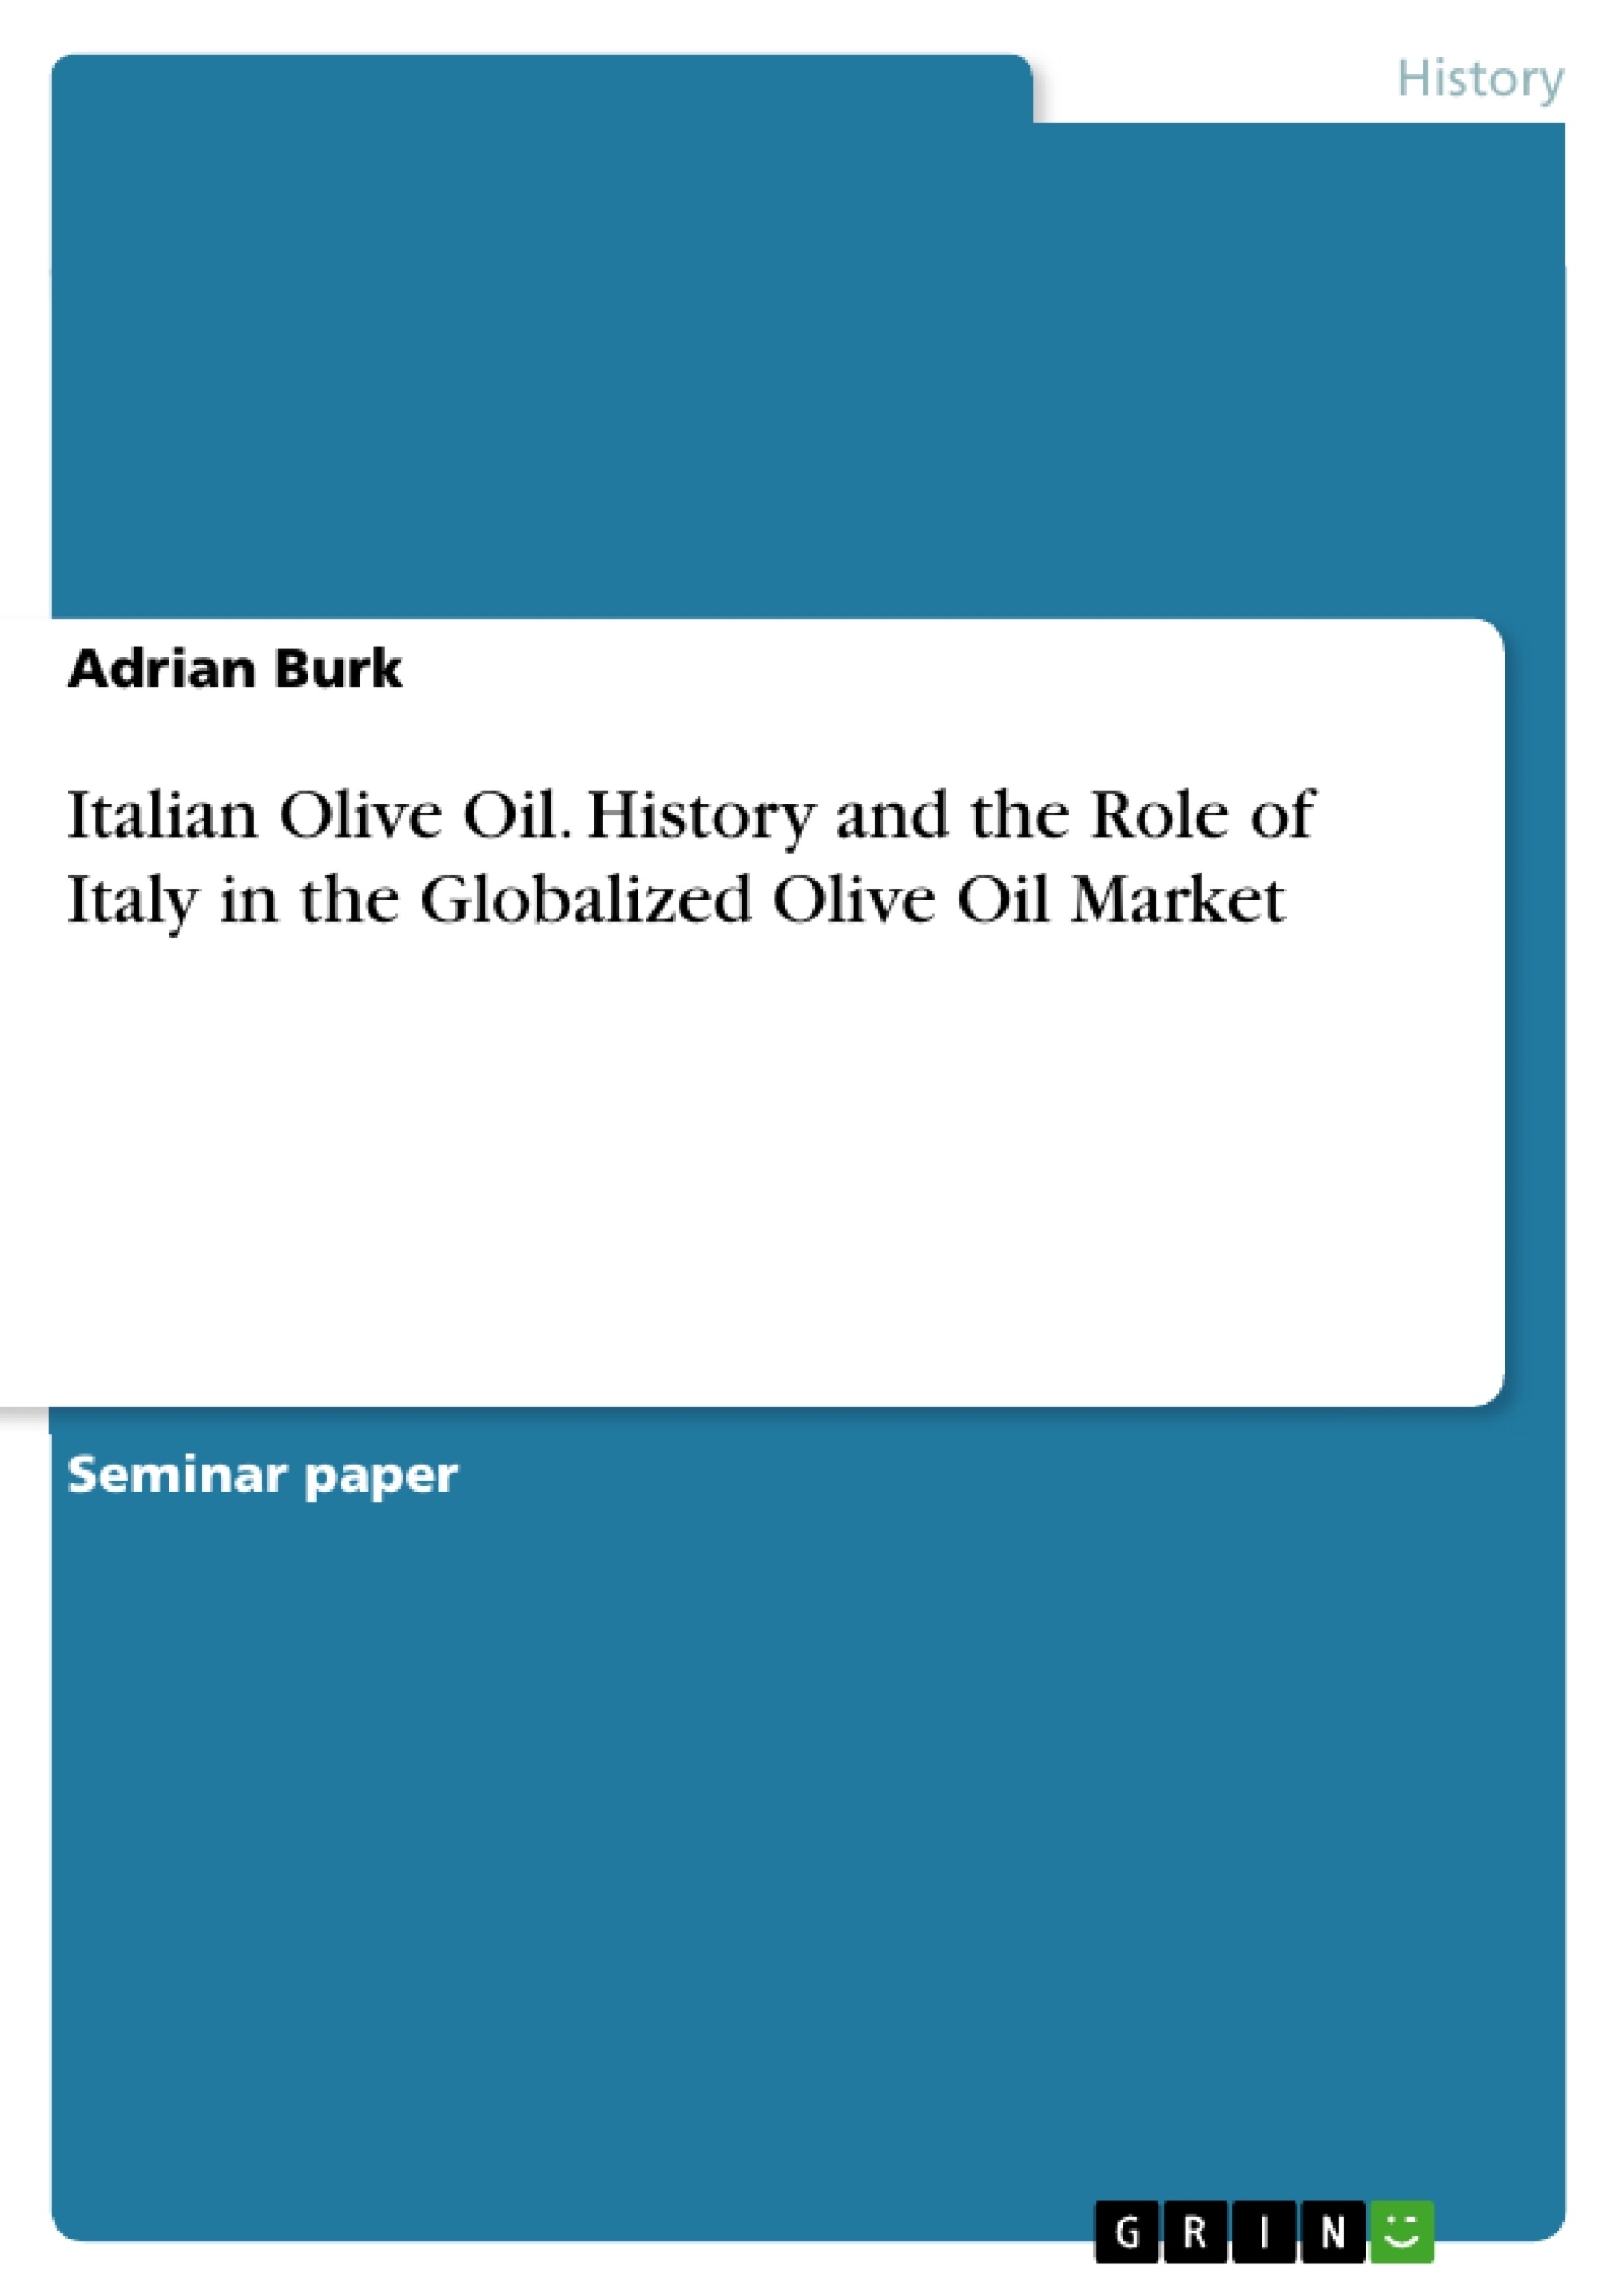 Título: Italian Olive Oil. History and the Role of Italy in the Globalized Olive Oil Market